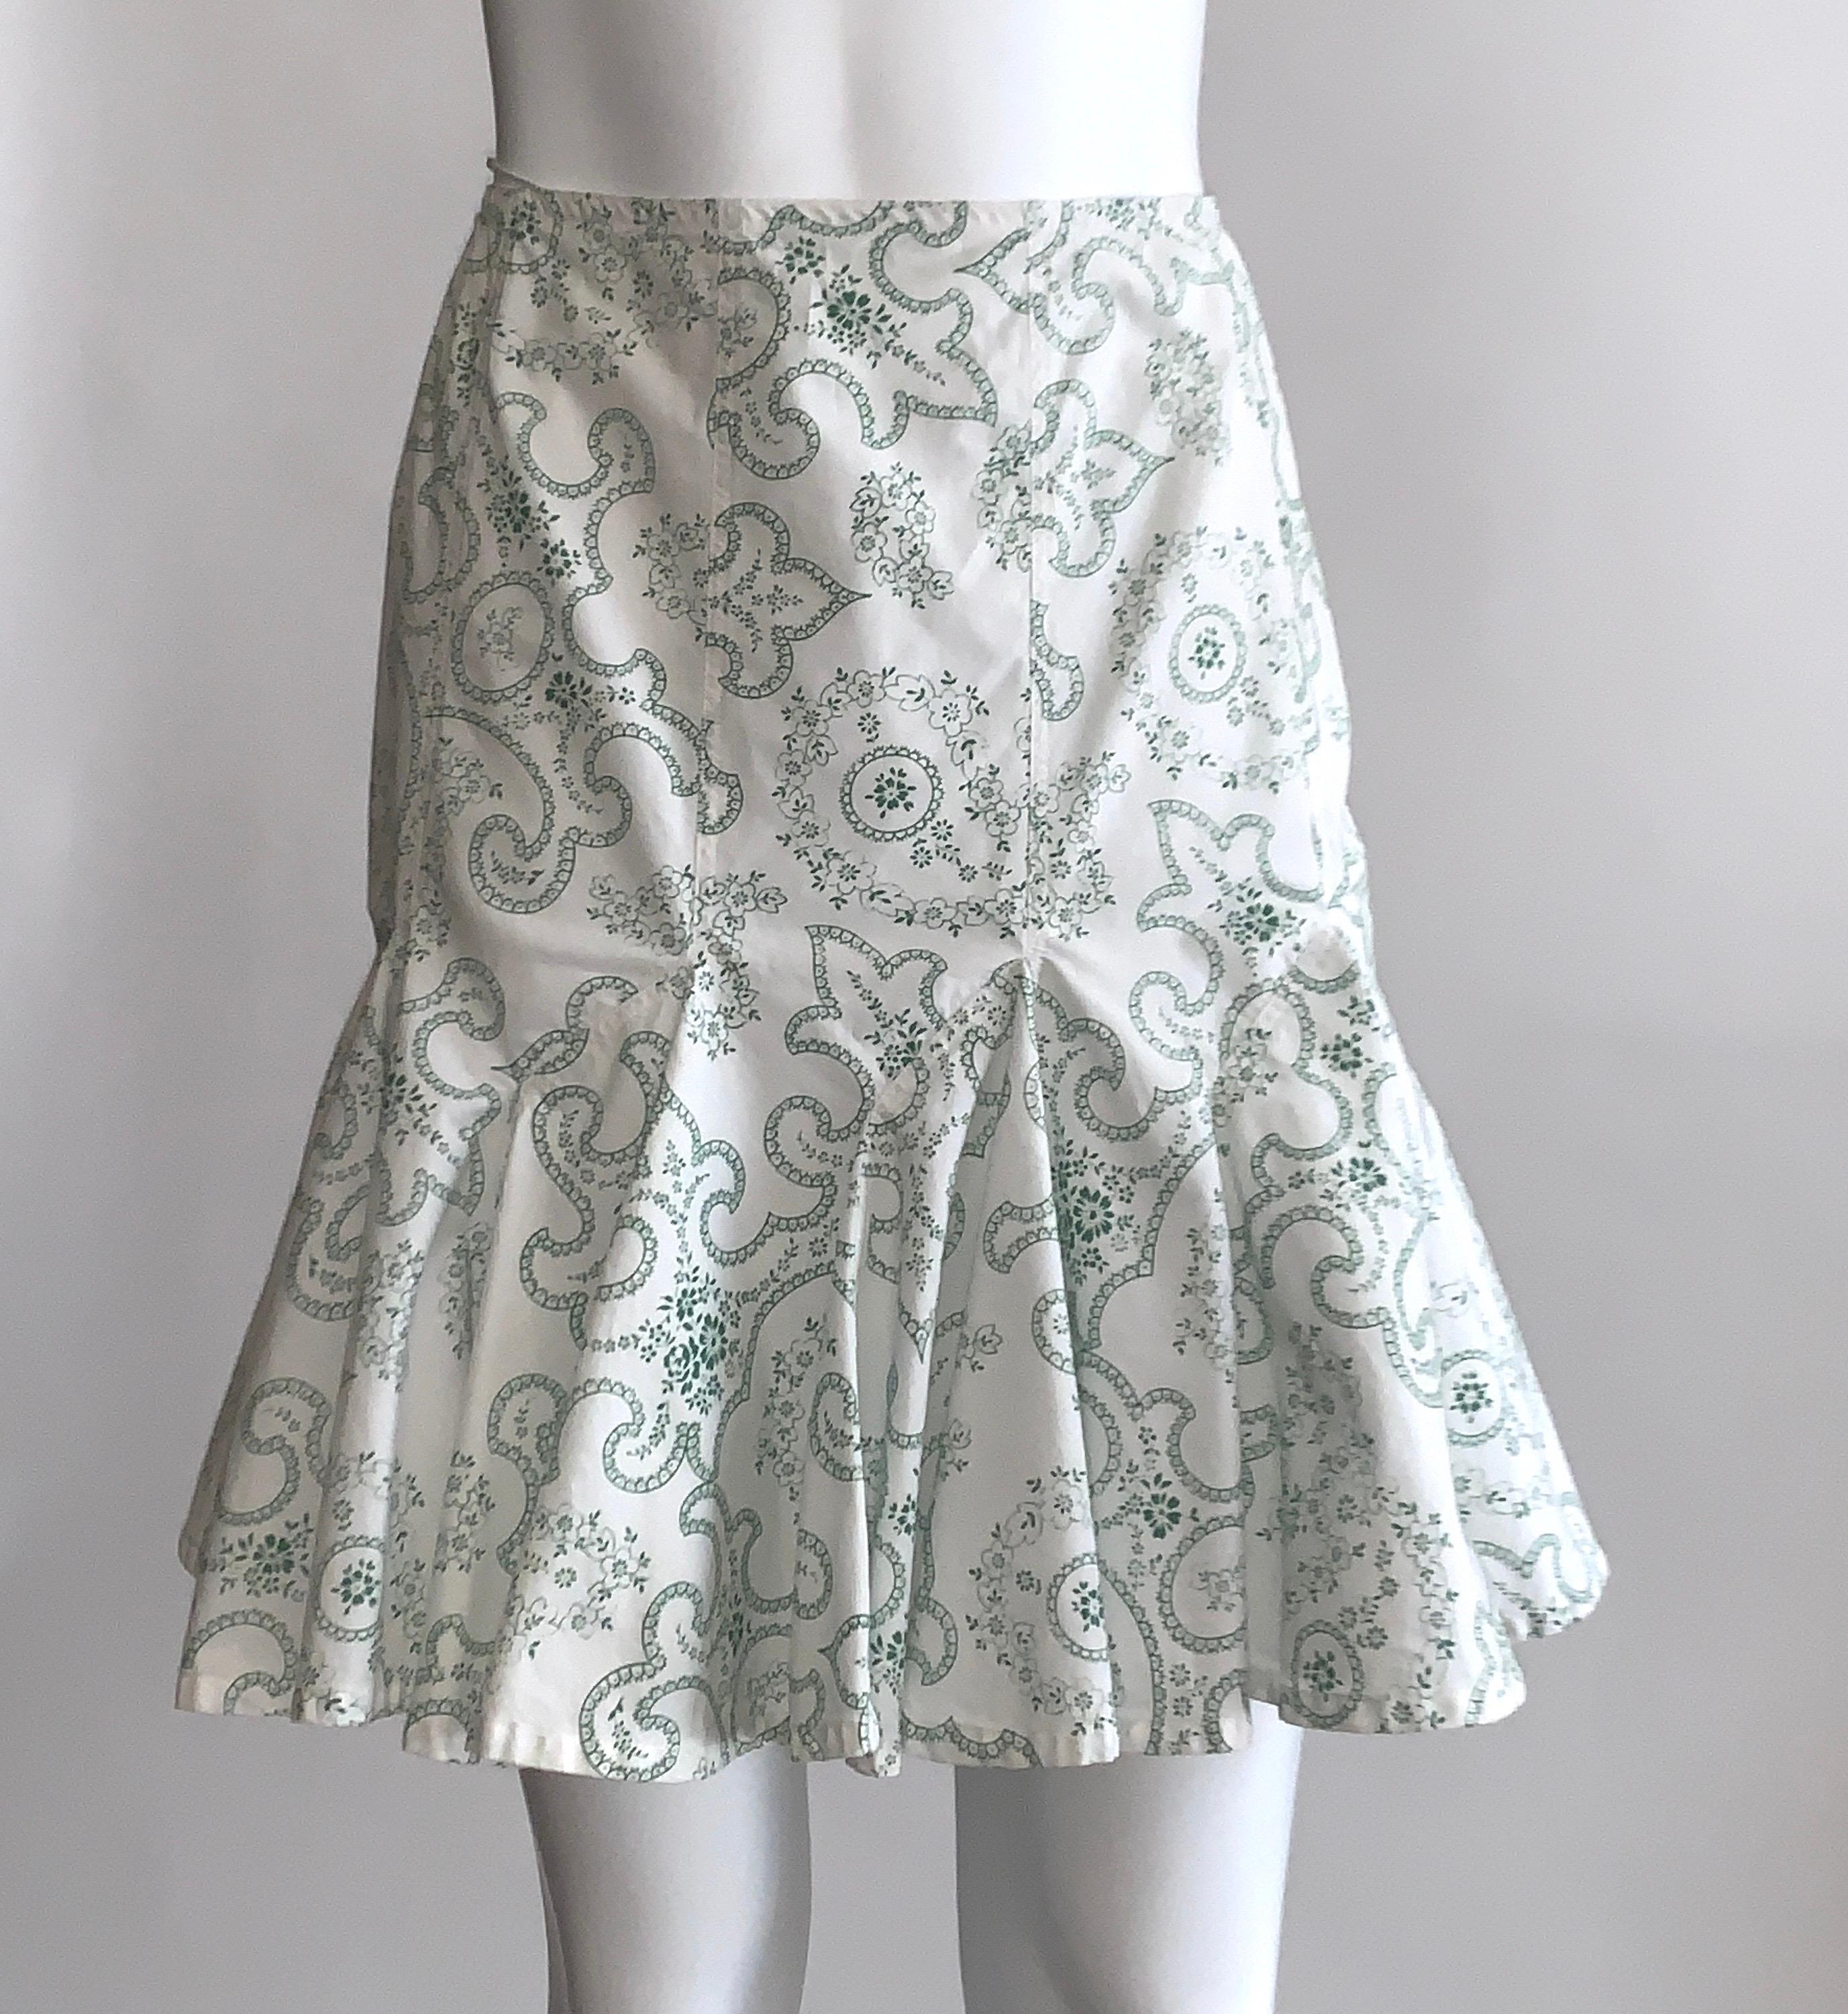 Azzedine Alaia early 2000s green and white paisley pencil skirt with flared ruffle bottom. 
Back zip and hook and eye.

100% cotton.

Made in Italy.

Labelled size FR 38, US 6. Runs small.
Waist 26